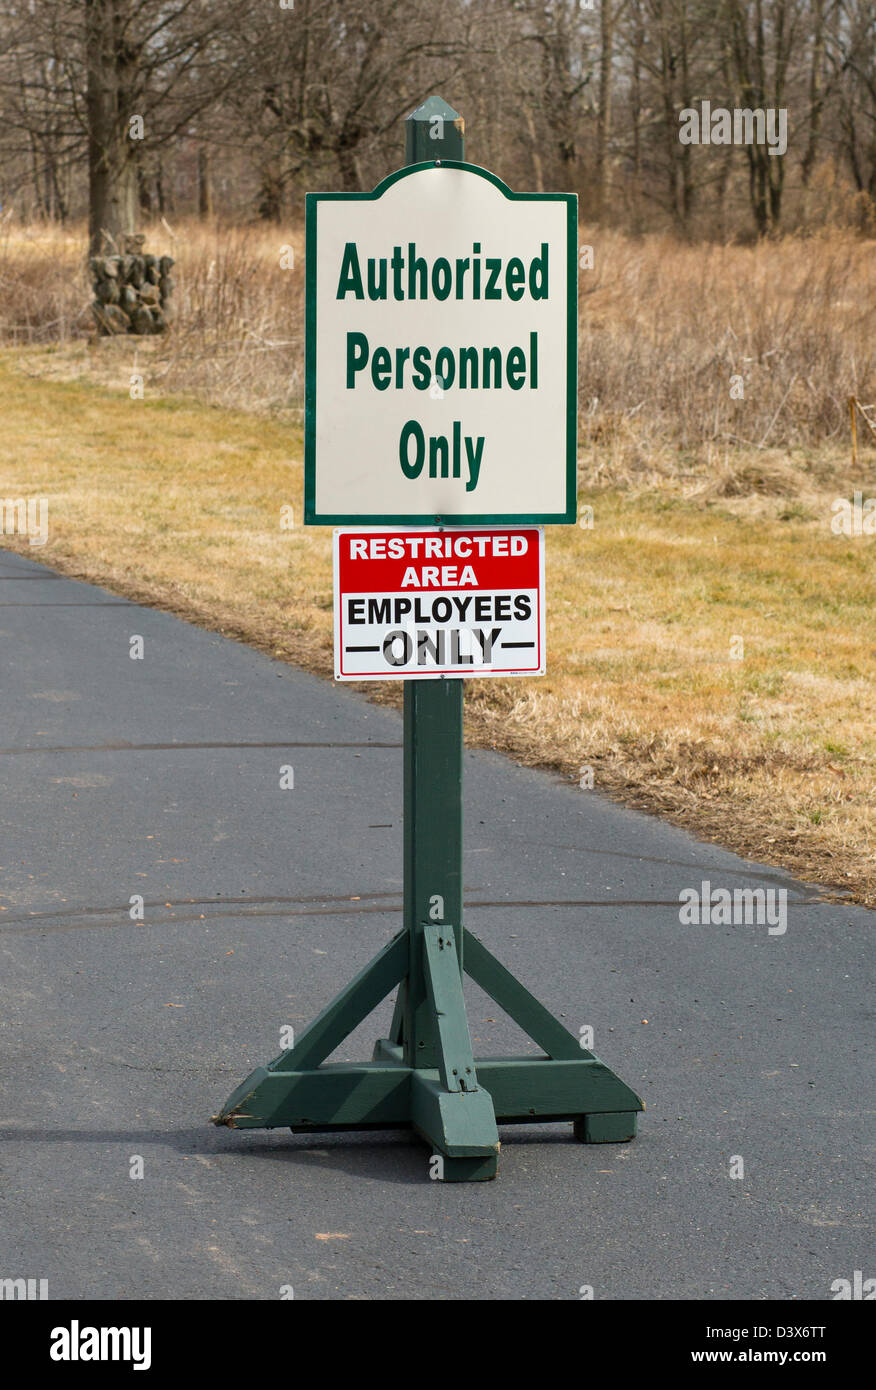 Restricted area sign authorized personnel only. Stock Photo